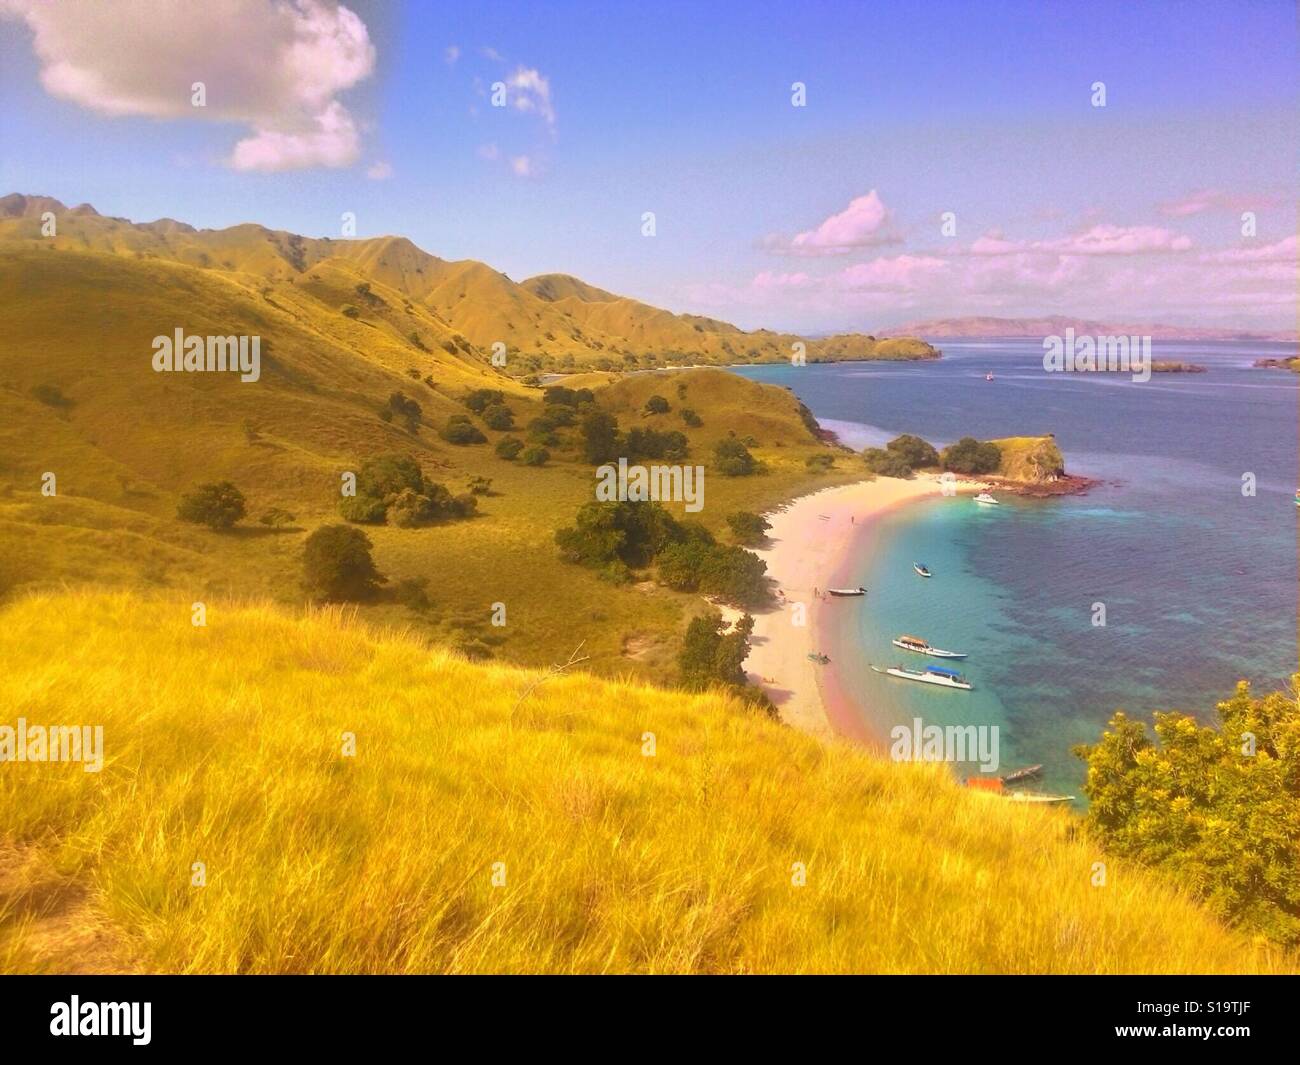 Komodo Islands Landscape with Sea and Beach View on Summer Time Stock Photo